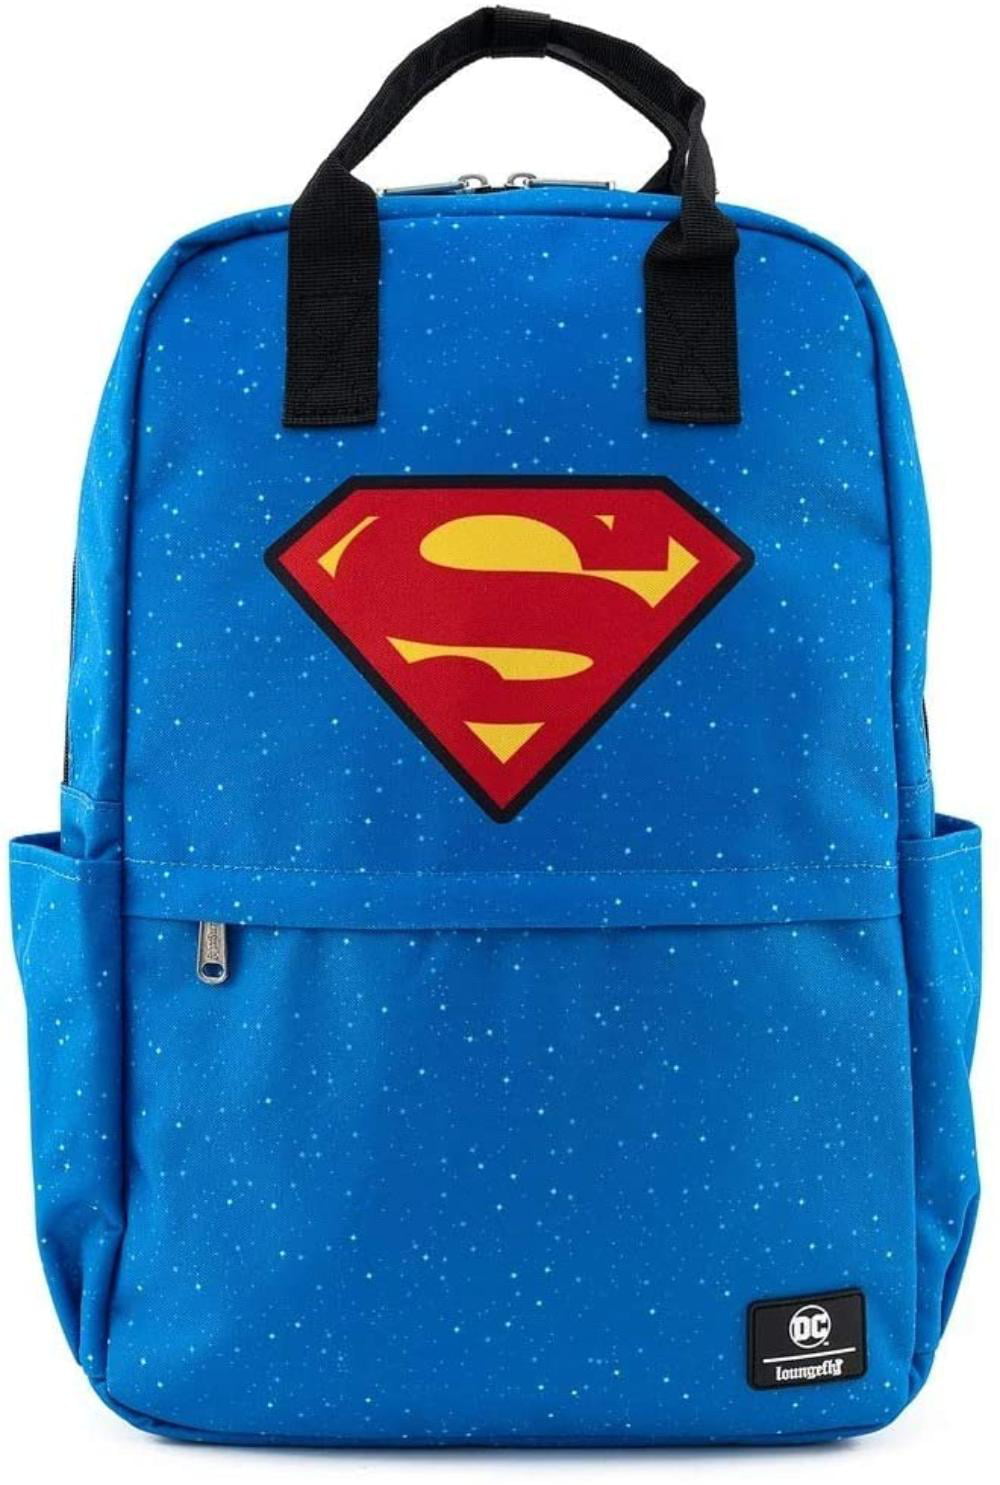 OFFICIAL LICENCED SUPERMAN RETRO COMIC STRIP STYLE DUFFEL BAG/BACKPACK/GYM BAG 